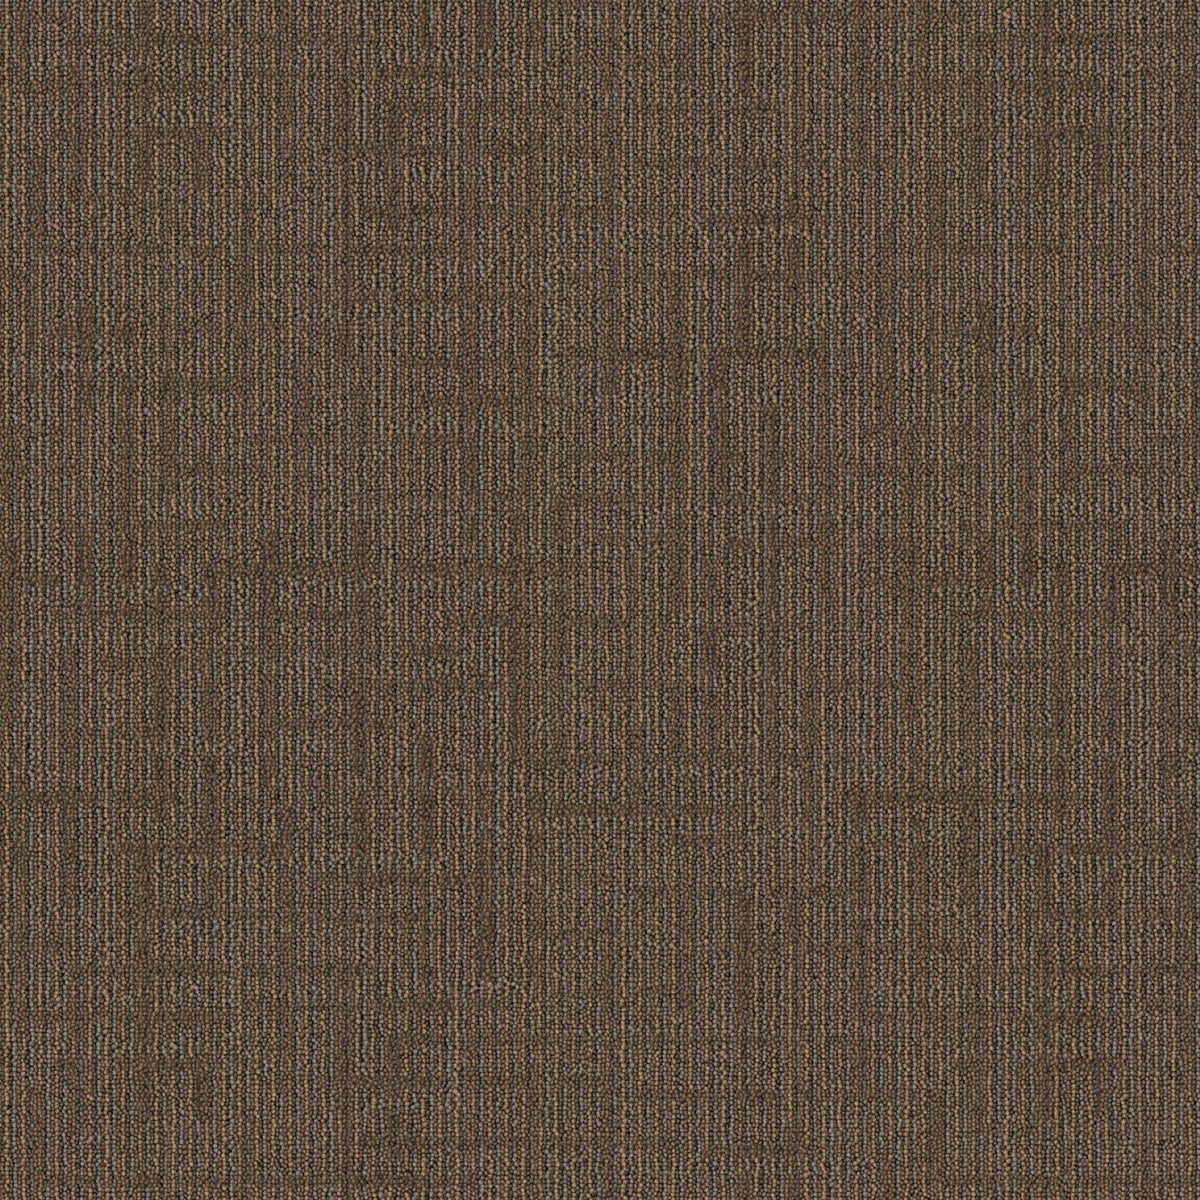 Mohawk Group - Bending Earth - Lateral Surface - Carpet Tile - Pumice